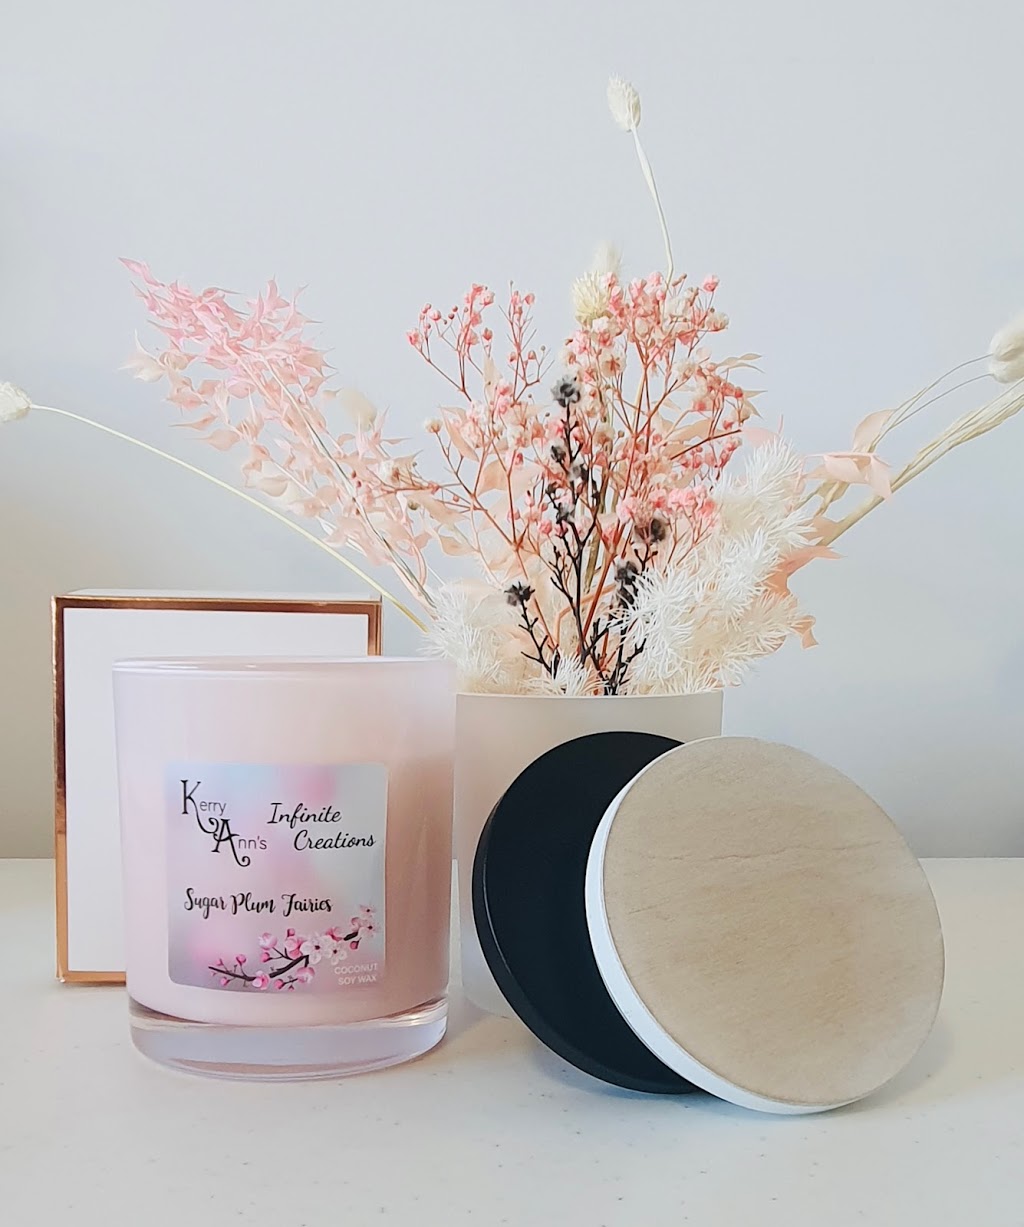 Kerry Anns Infinite Creations @ The Scented Candle | 102 Bluestone Dr, Glenmore Park NSW 2745, Australia | Phone: 0417 673 520